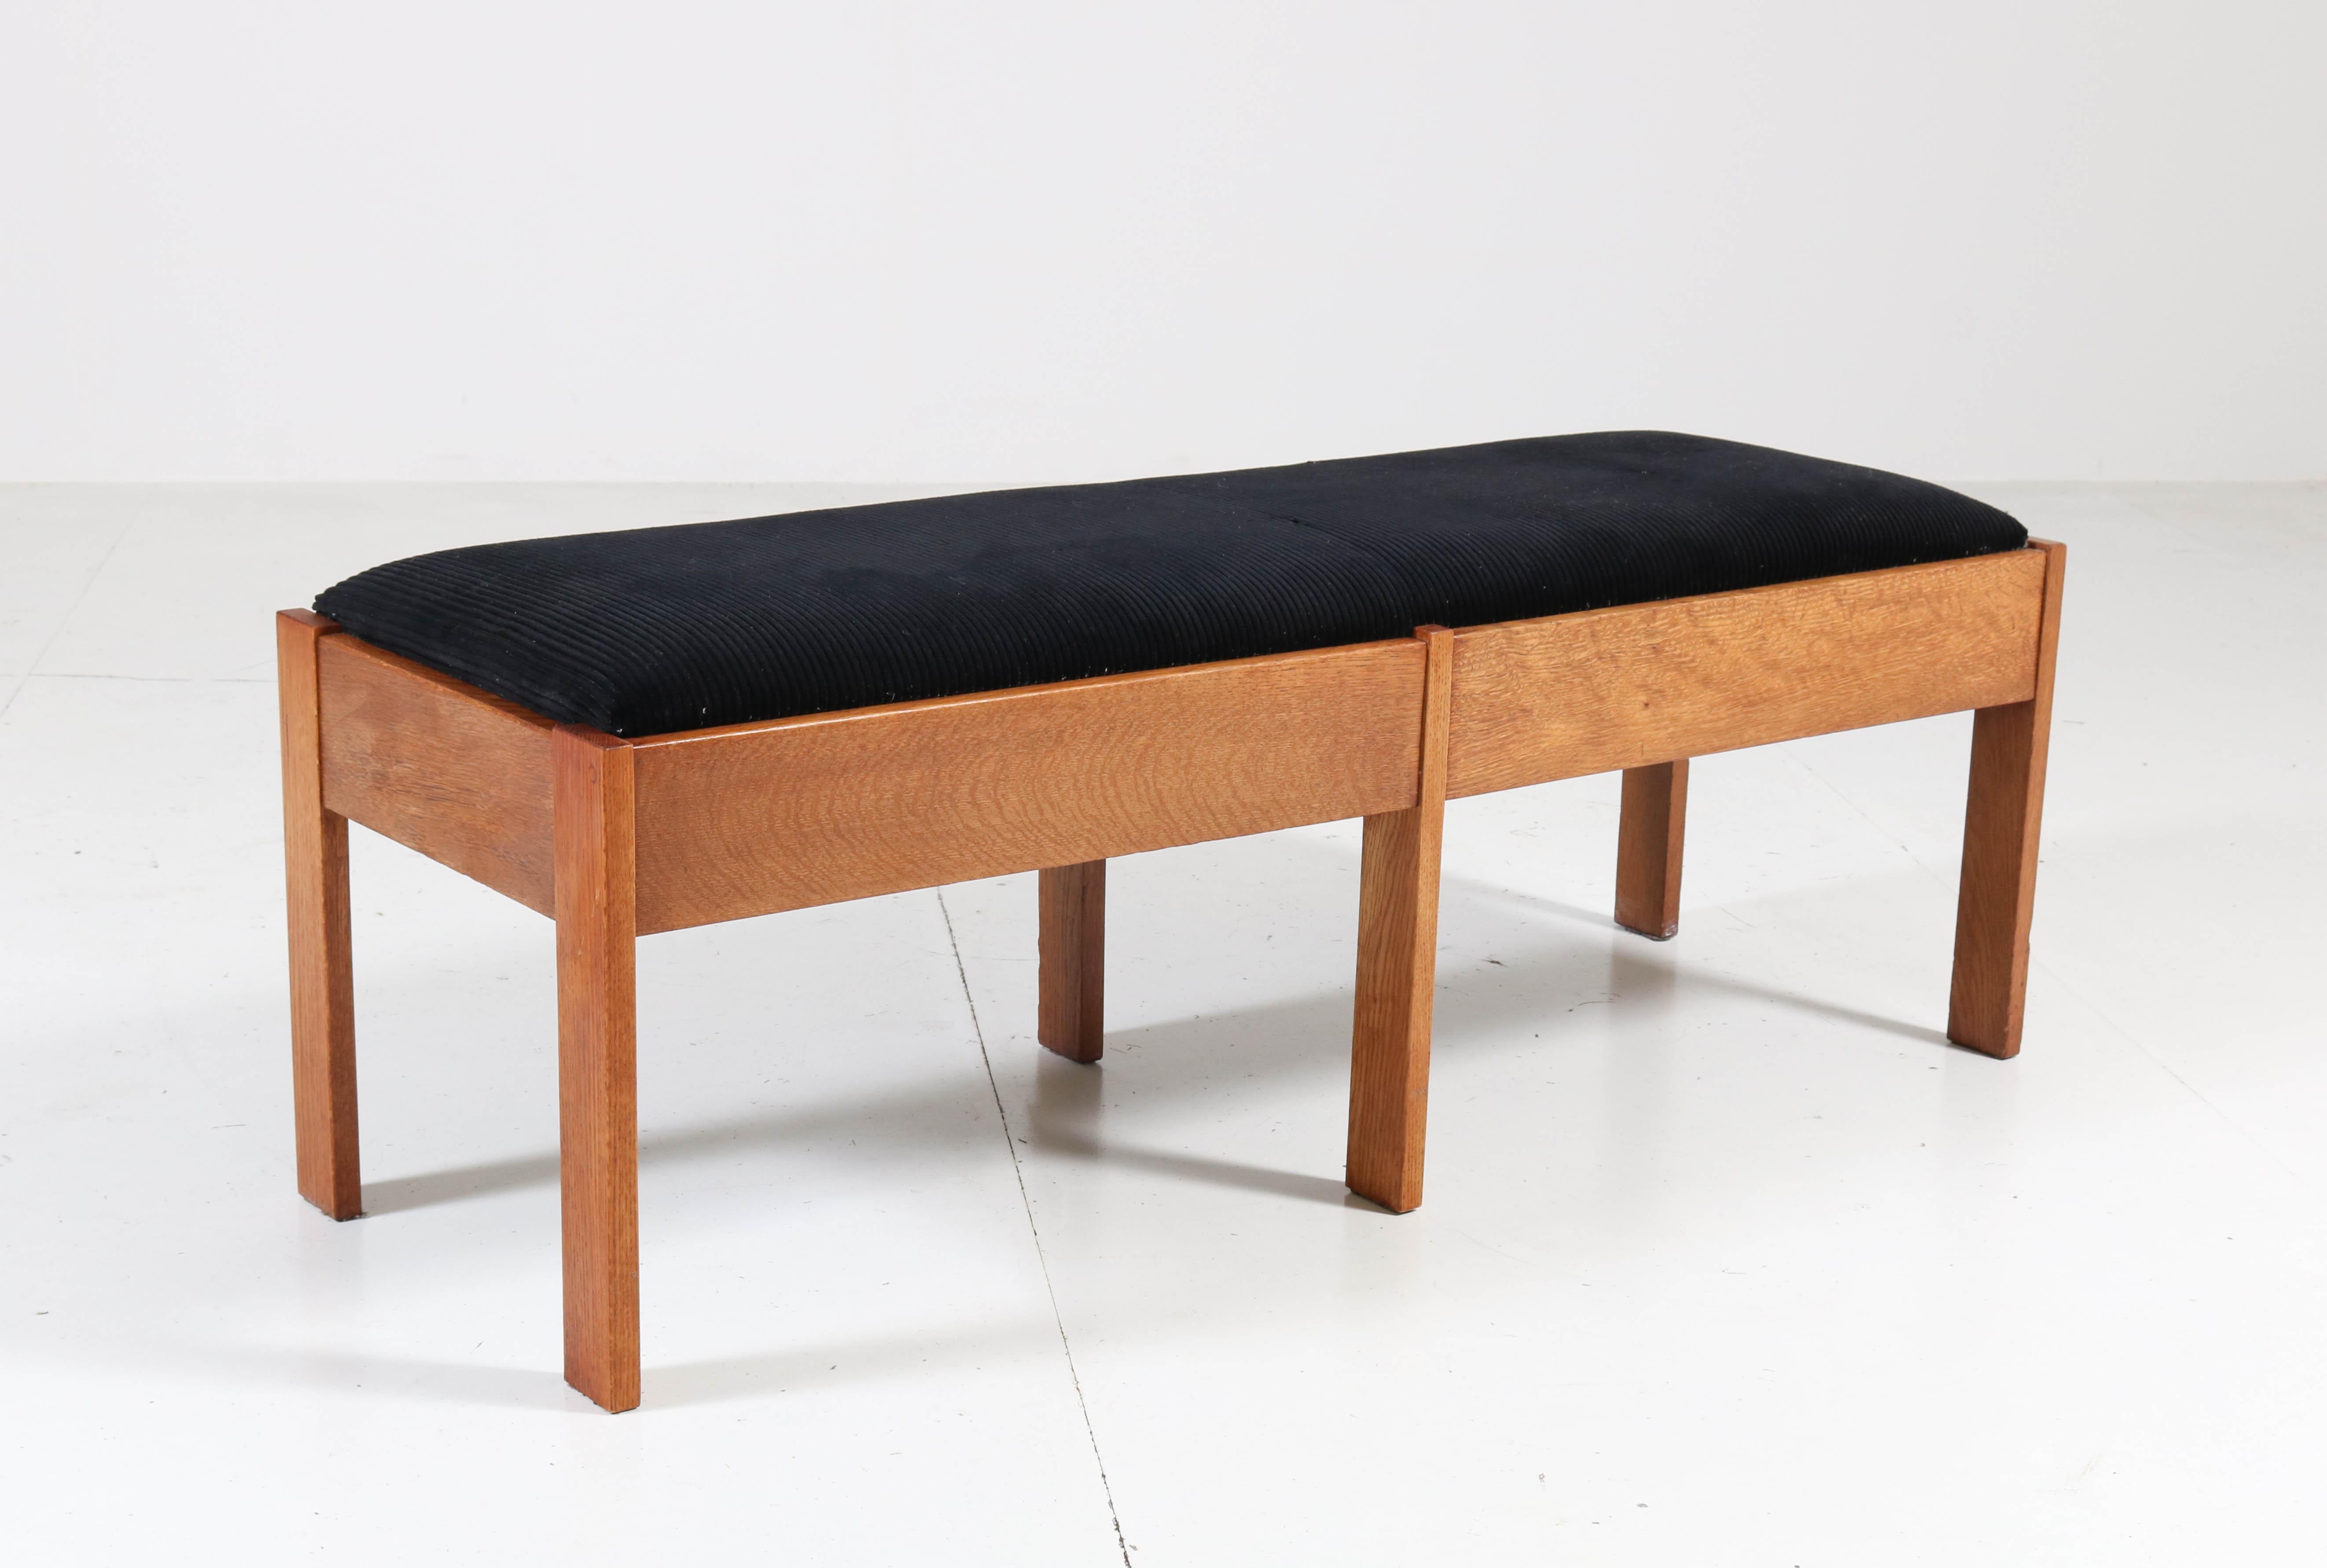 Early 20th Century Oak Art Deco Haagse School Bench or Sofa by J.C. Jansen for L.O.V. Oosterbeek